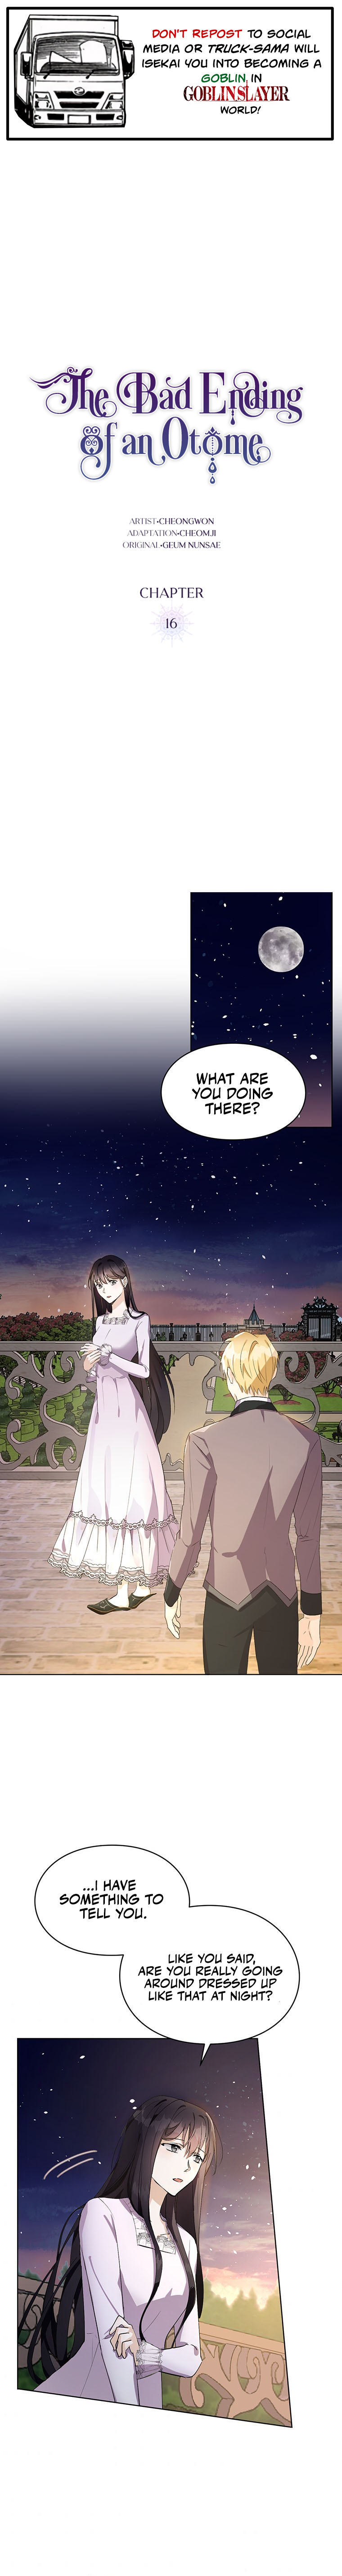 The Bad Ending Of The Otome Game - Page 1